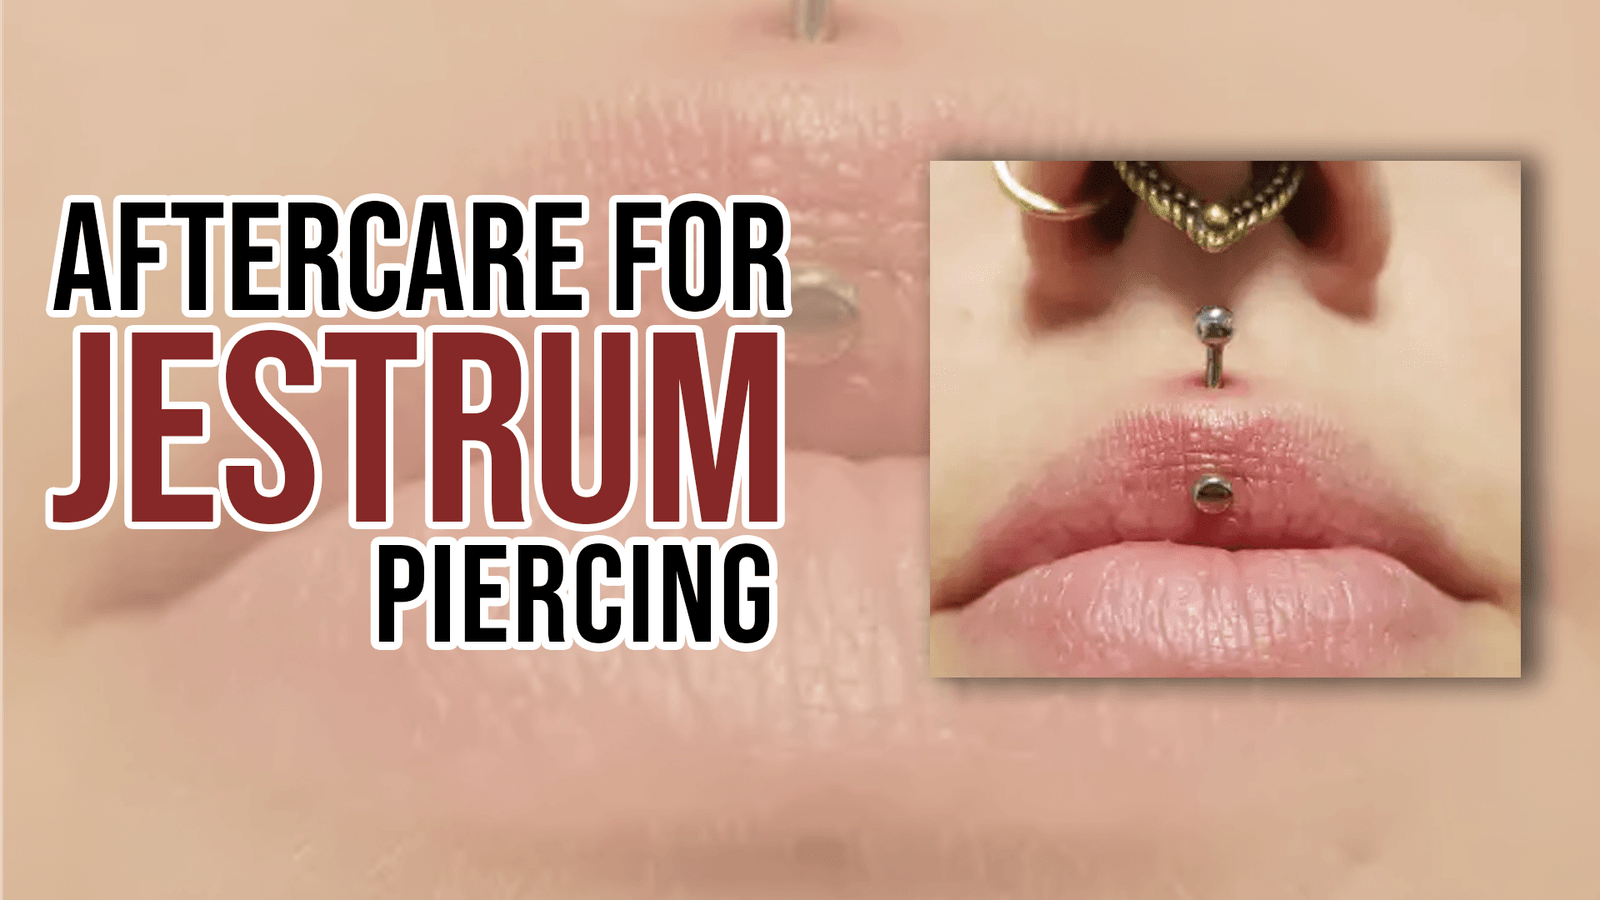 Aftercare for Jestrum Piercing